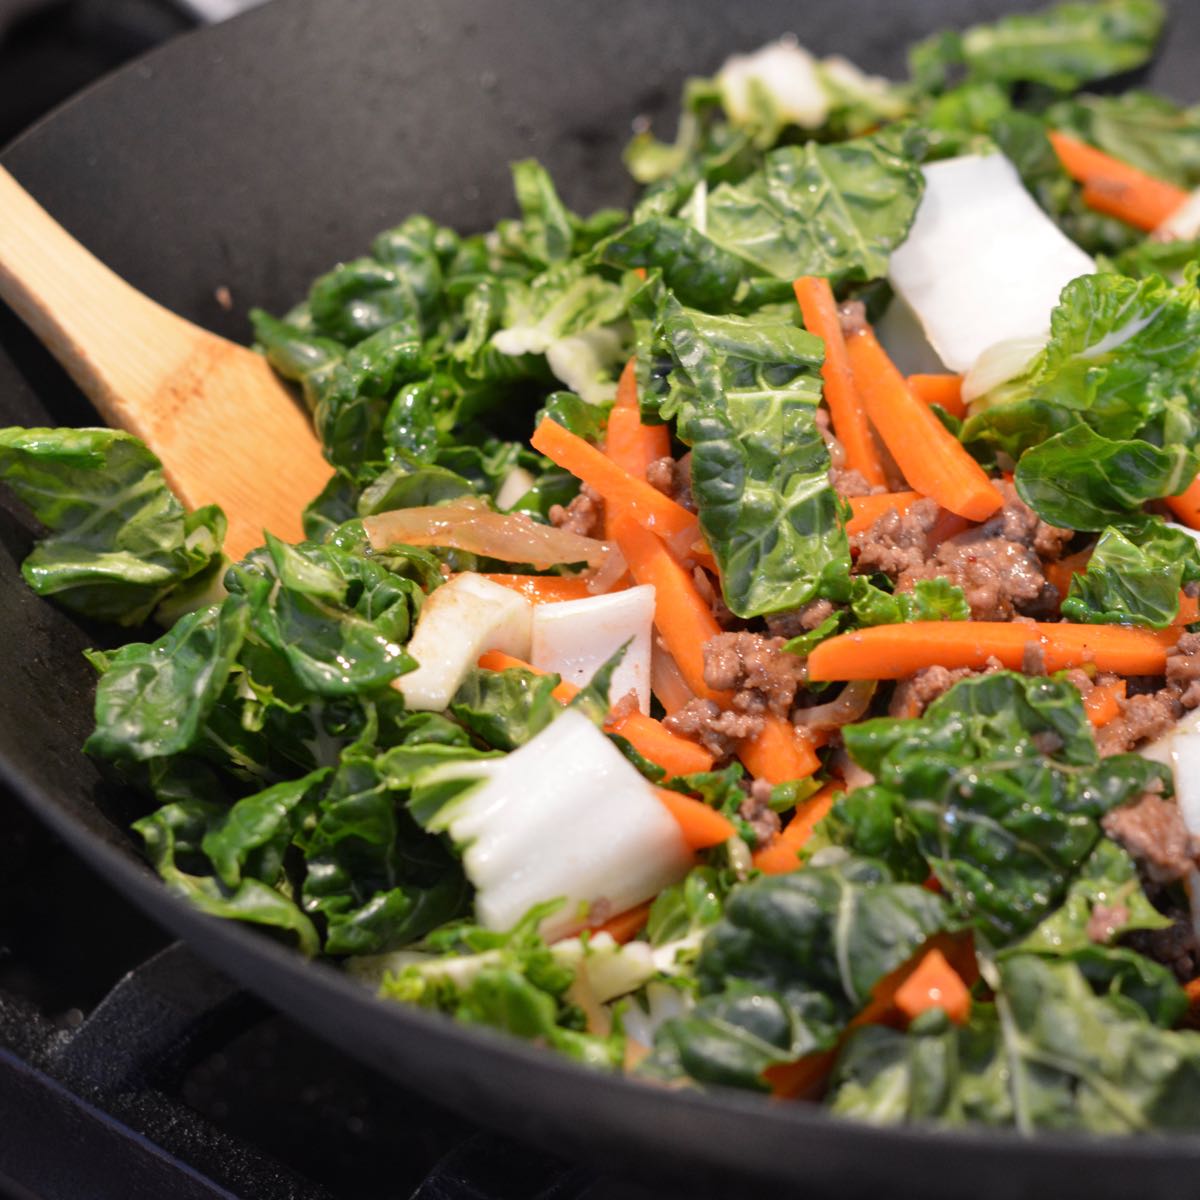 A wok full of raw bok choy and julienned carrot on top of the beef.